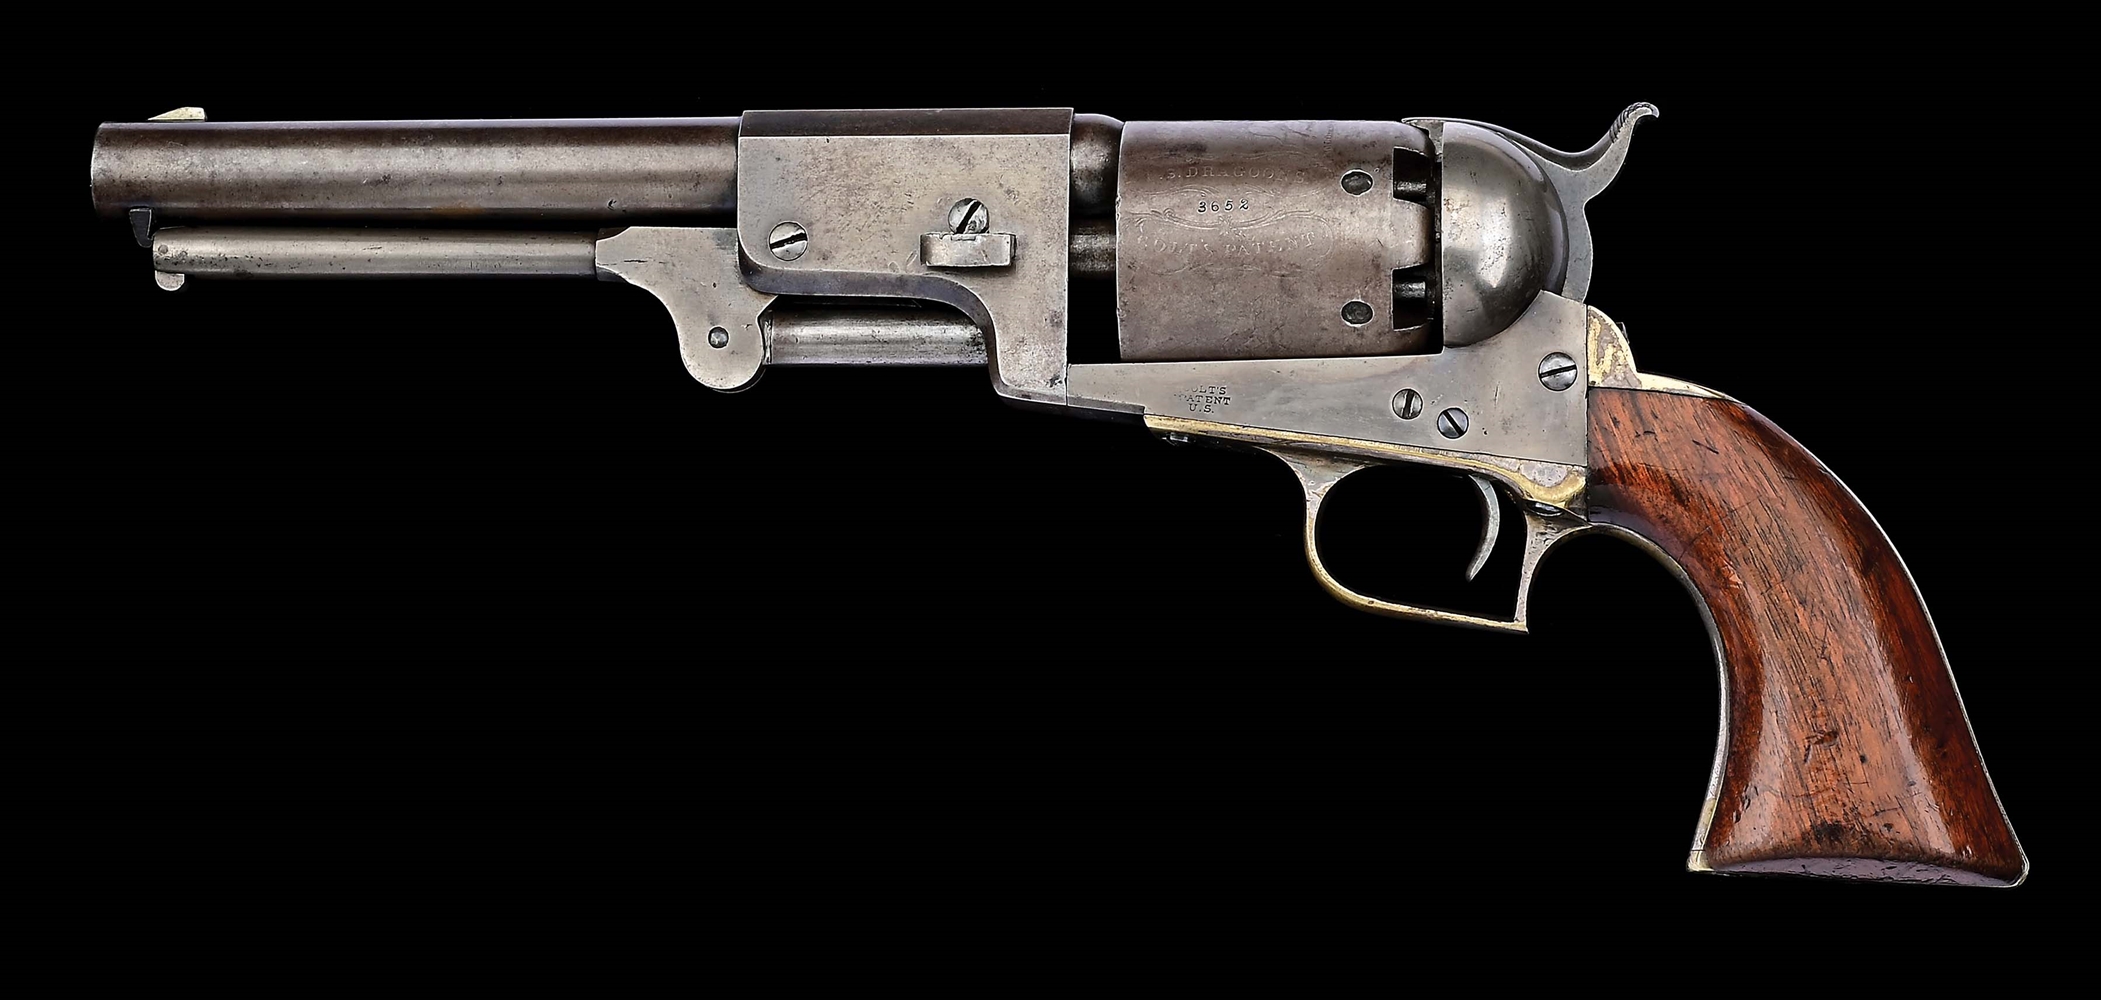 (A) FIRST MODEL COLT DRAGOON SINGLE ACTION PERCUSSION REVOLVER (1848).